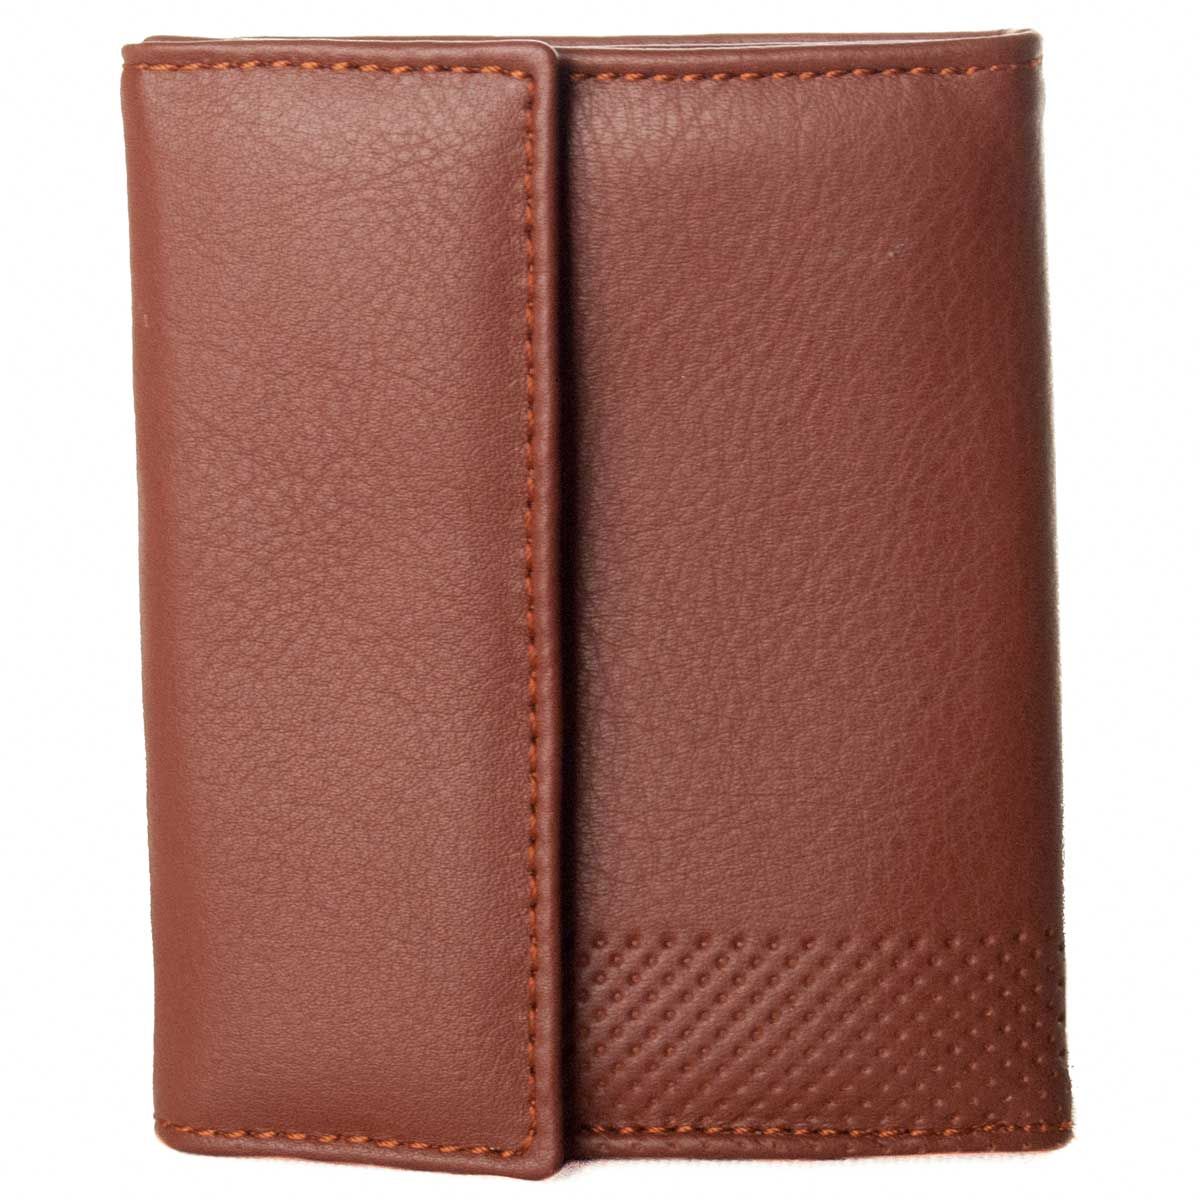 Collection Cáspula Emilio Faraoni. Measure: high 8.50 cm * Width 10.50 cm * Depth 1.50 cm. The material in which a man's portfolio is designed is essential. Quality skin is always an incentive when buying a portfolio, as it is a durable material, with soft and pleasant touch to sight. A correct distribution within the portfolio for men is fundamental. For all these reasons, we always offer men's wallets performed at 100% natural, pleasant touch, as this American portfolio of man with departments for tickets, cards and coins. Elegant, practical and comfortable with a reduced size to comfortably carry in the jackets or in the same pockets of the shirts. Made in Spain.